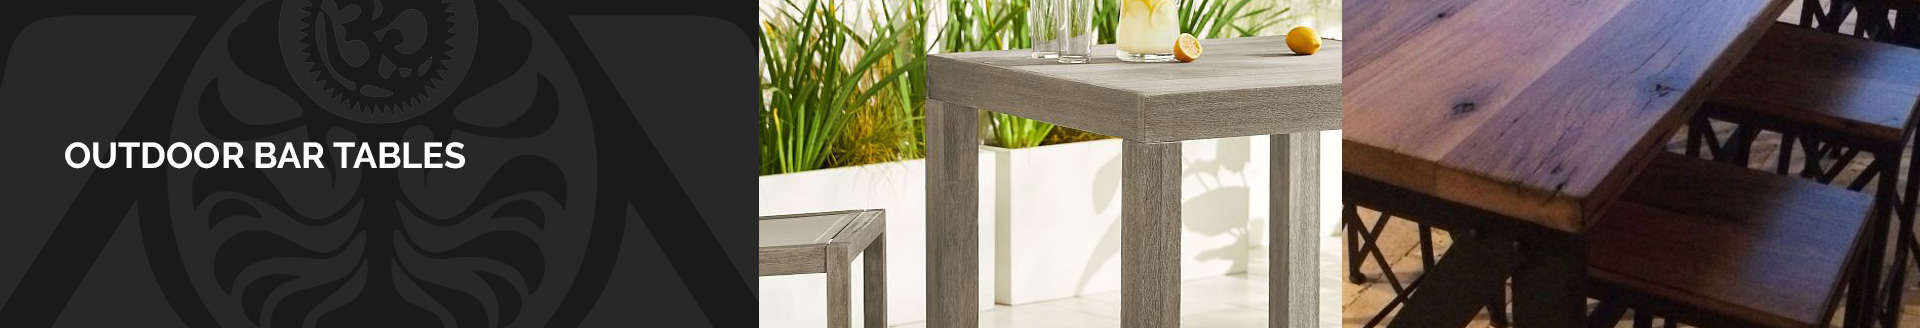 Outdoor Bar Tables catalogue manufacturers wholesale Bali Java Indonesia